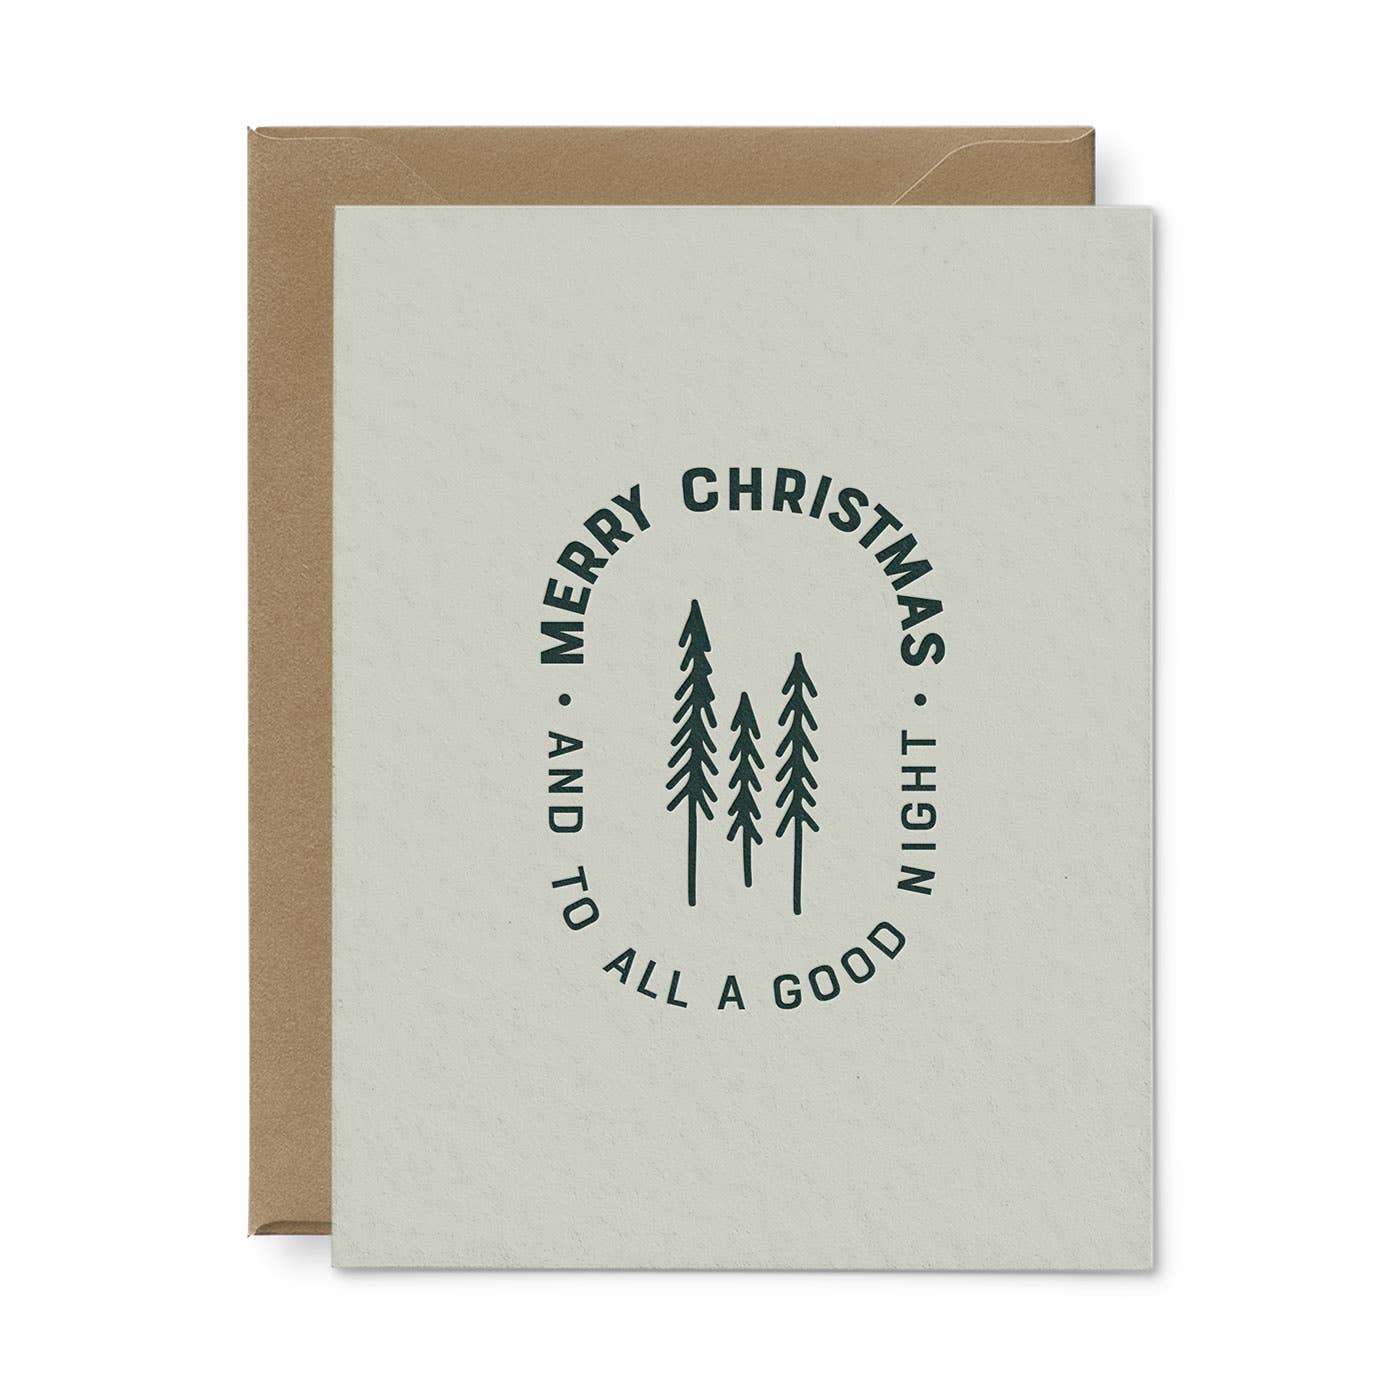 Merry Christmas With Trees Greeting Card - Box Set of 6